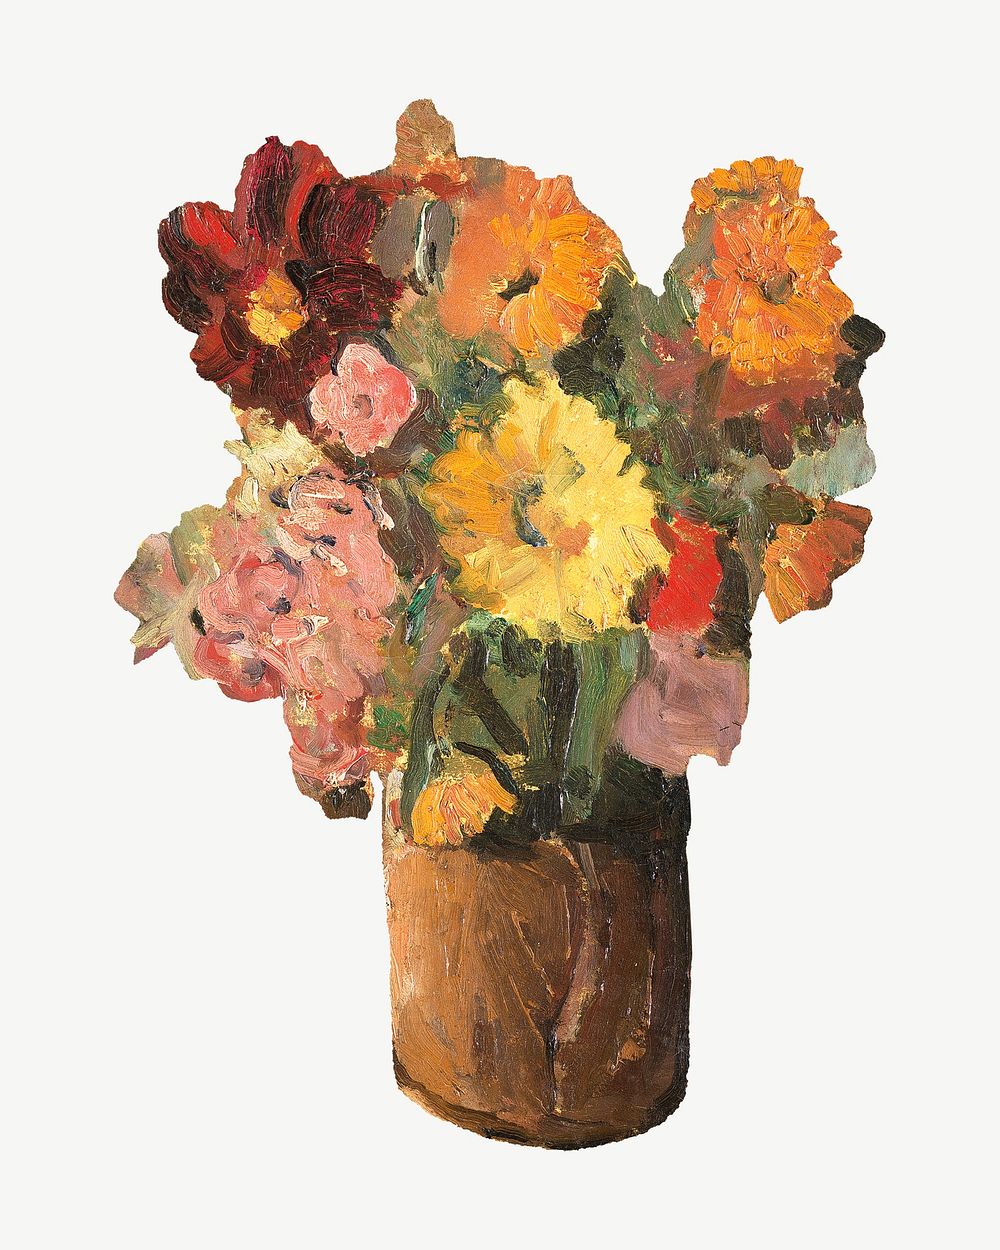 Flower vase still life, vintage illustration by Roger Fry psd. Remixed by rawpixel.